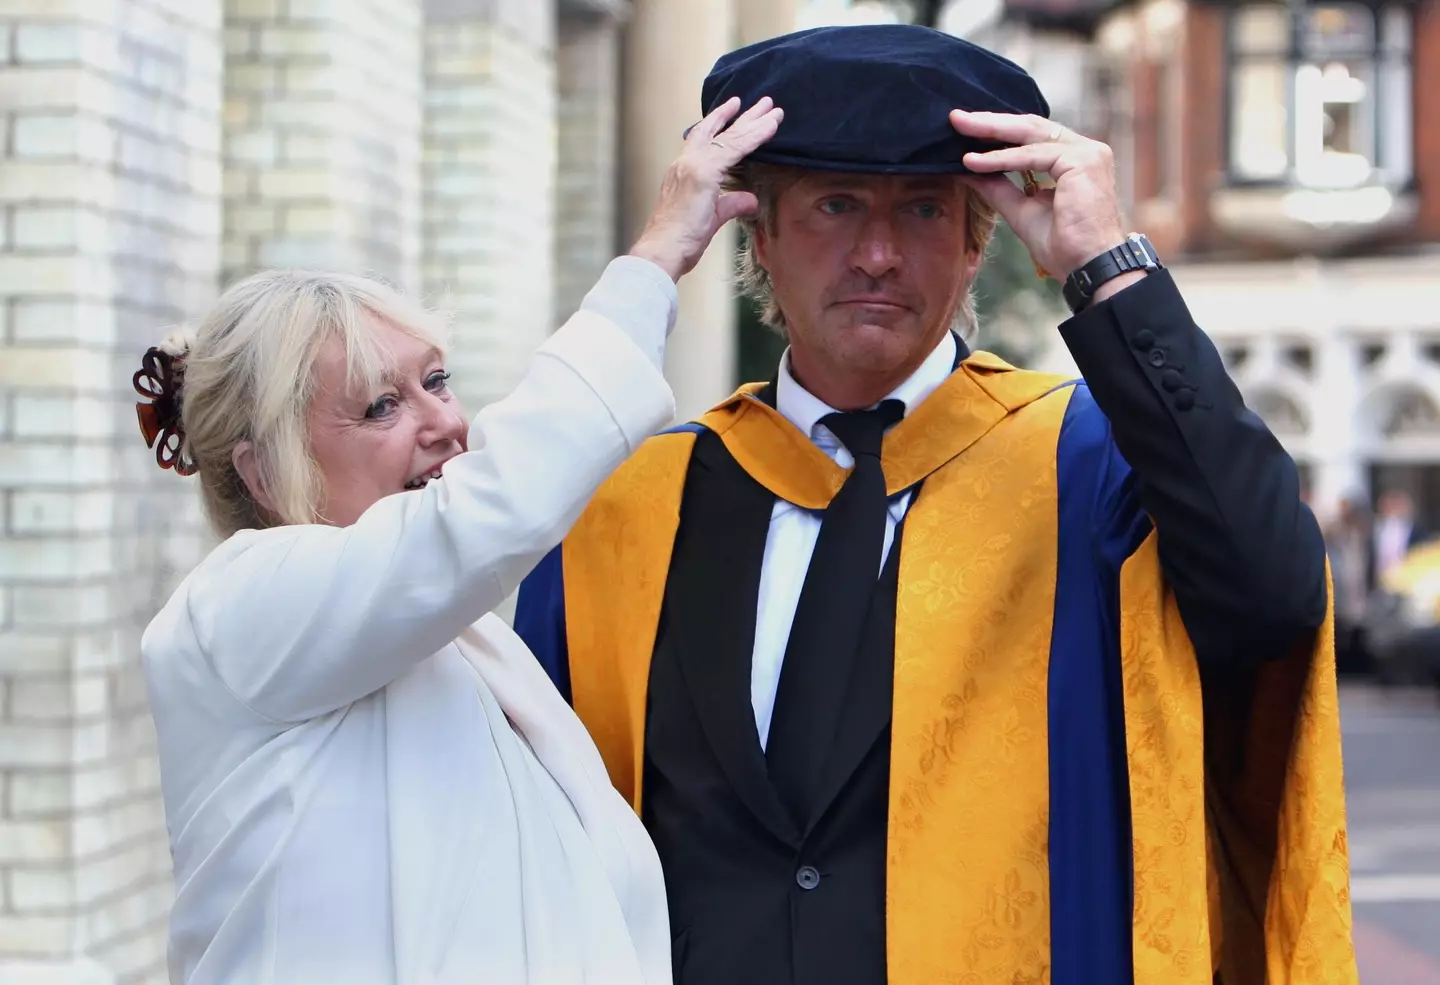 Broadcaster Richard Madeley and his wife Judy pose for a photograph after he received an honorary degree from the Anglia Ruskin University in Cambridge, Cambridgeshire.